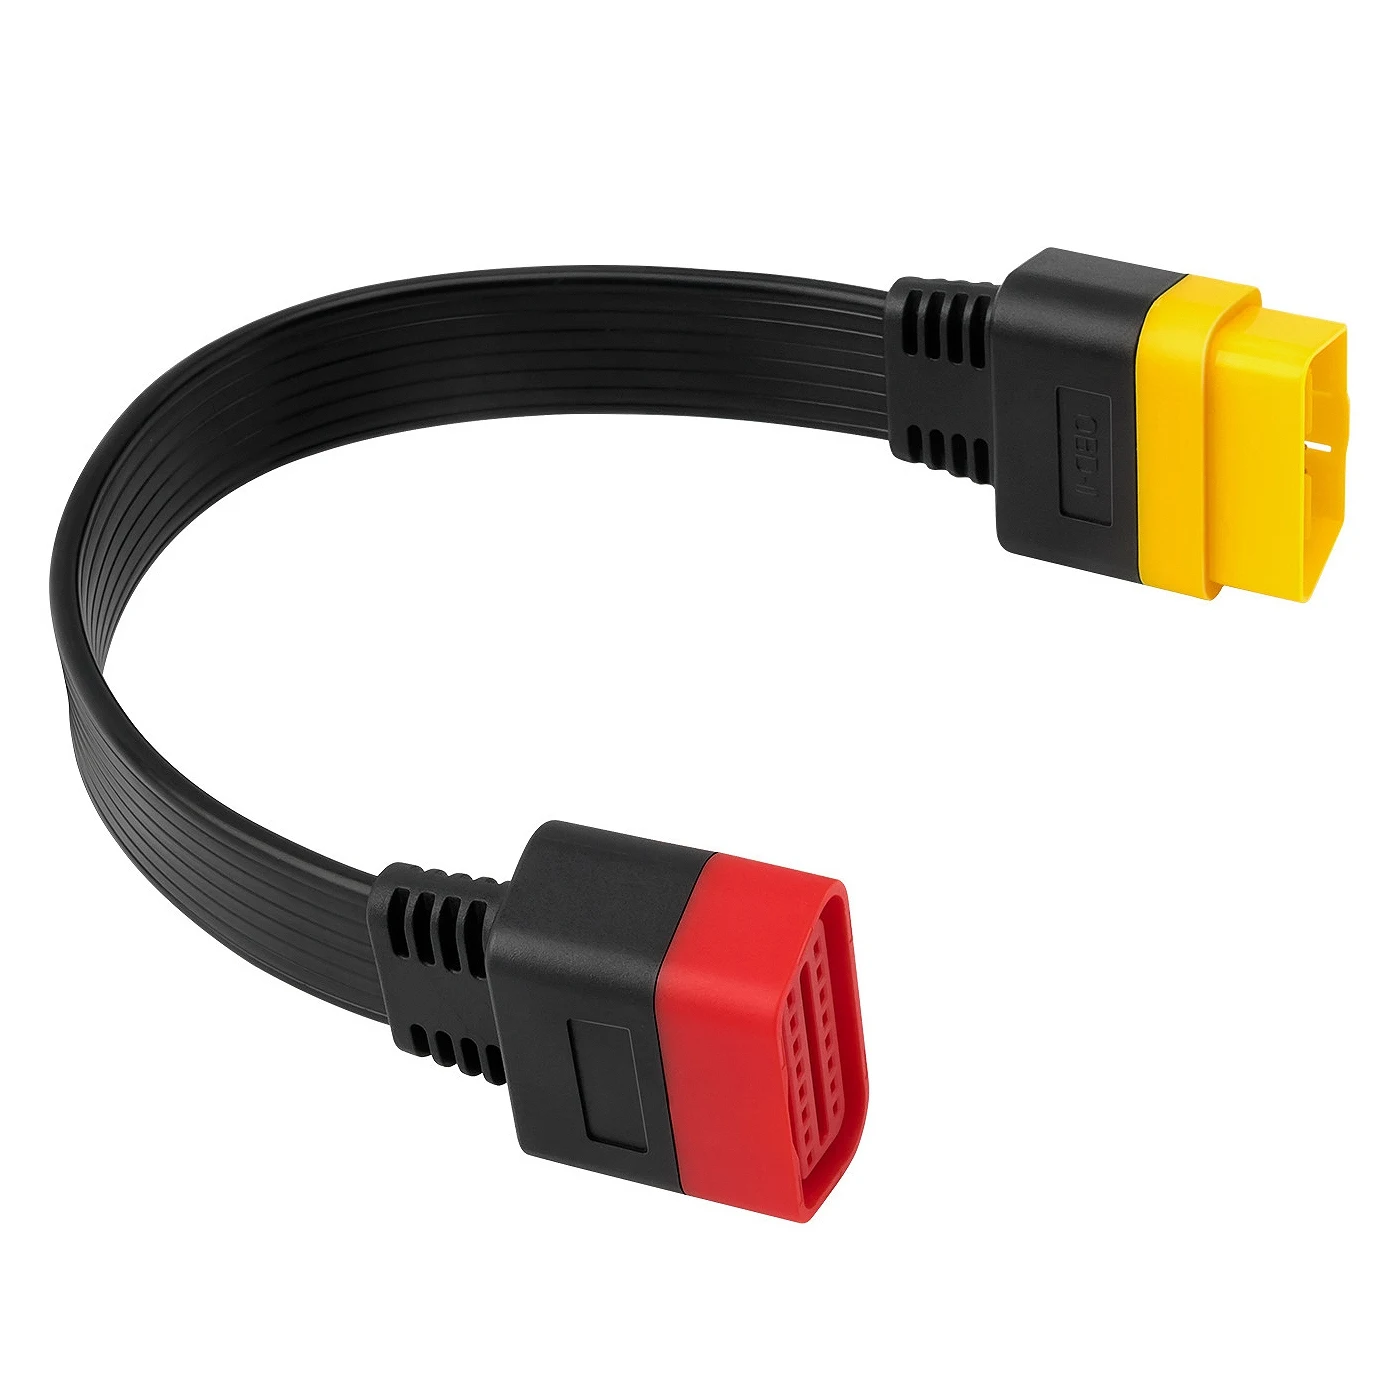 

New OBD OBD2 Extension Cable Connector for Launch X431 V/Easydiag 3.0/Mdiag/Golo Main 16Pin Male to Female Cable 36cm